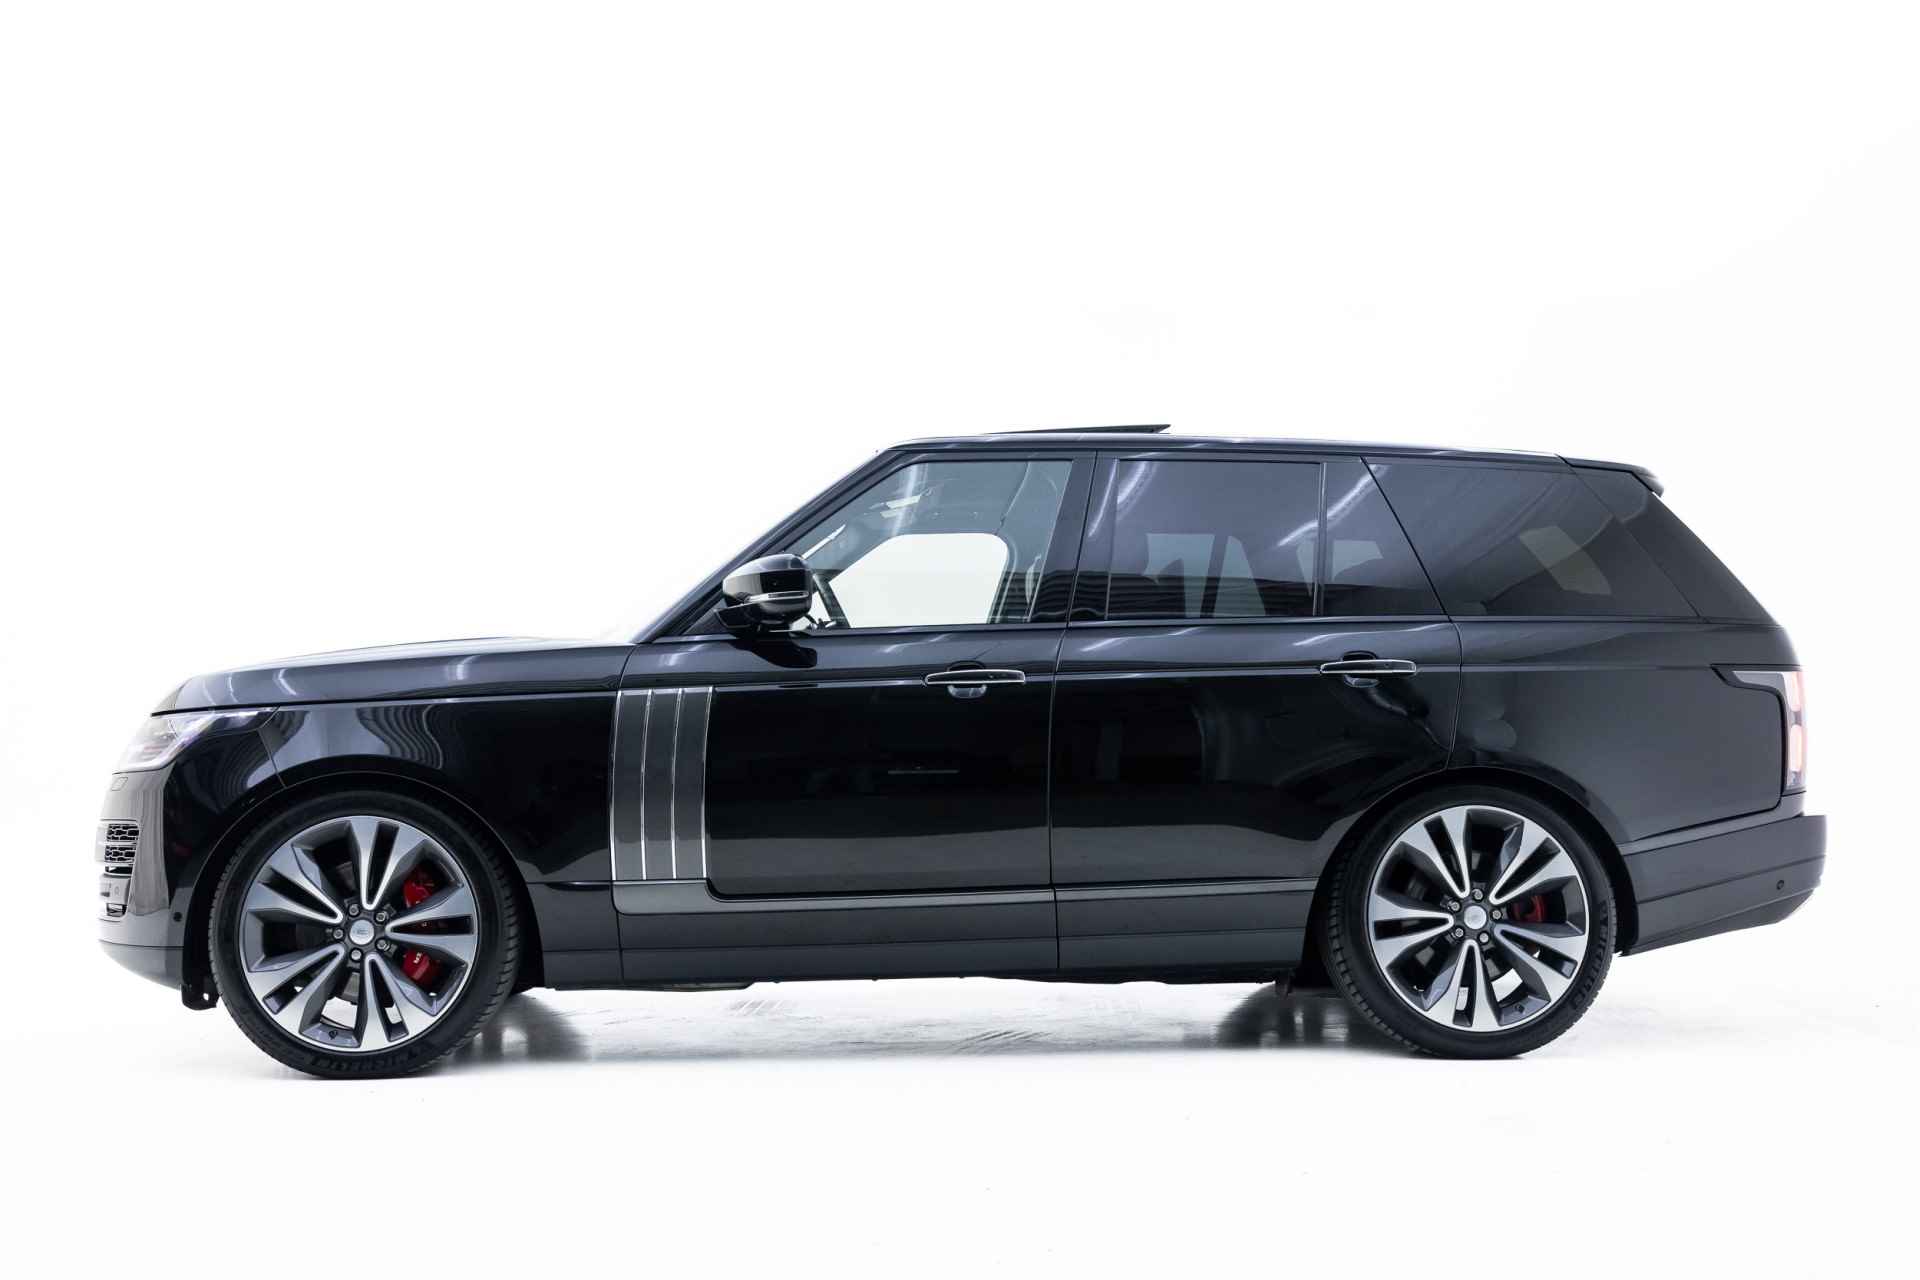 Land Rover Range Rover P565 SVAutobiography Dynamic Black | Hot Stone Massage | Carbon interieur afwerking | Executive Rear Seating | - 3/42